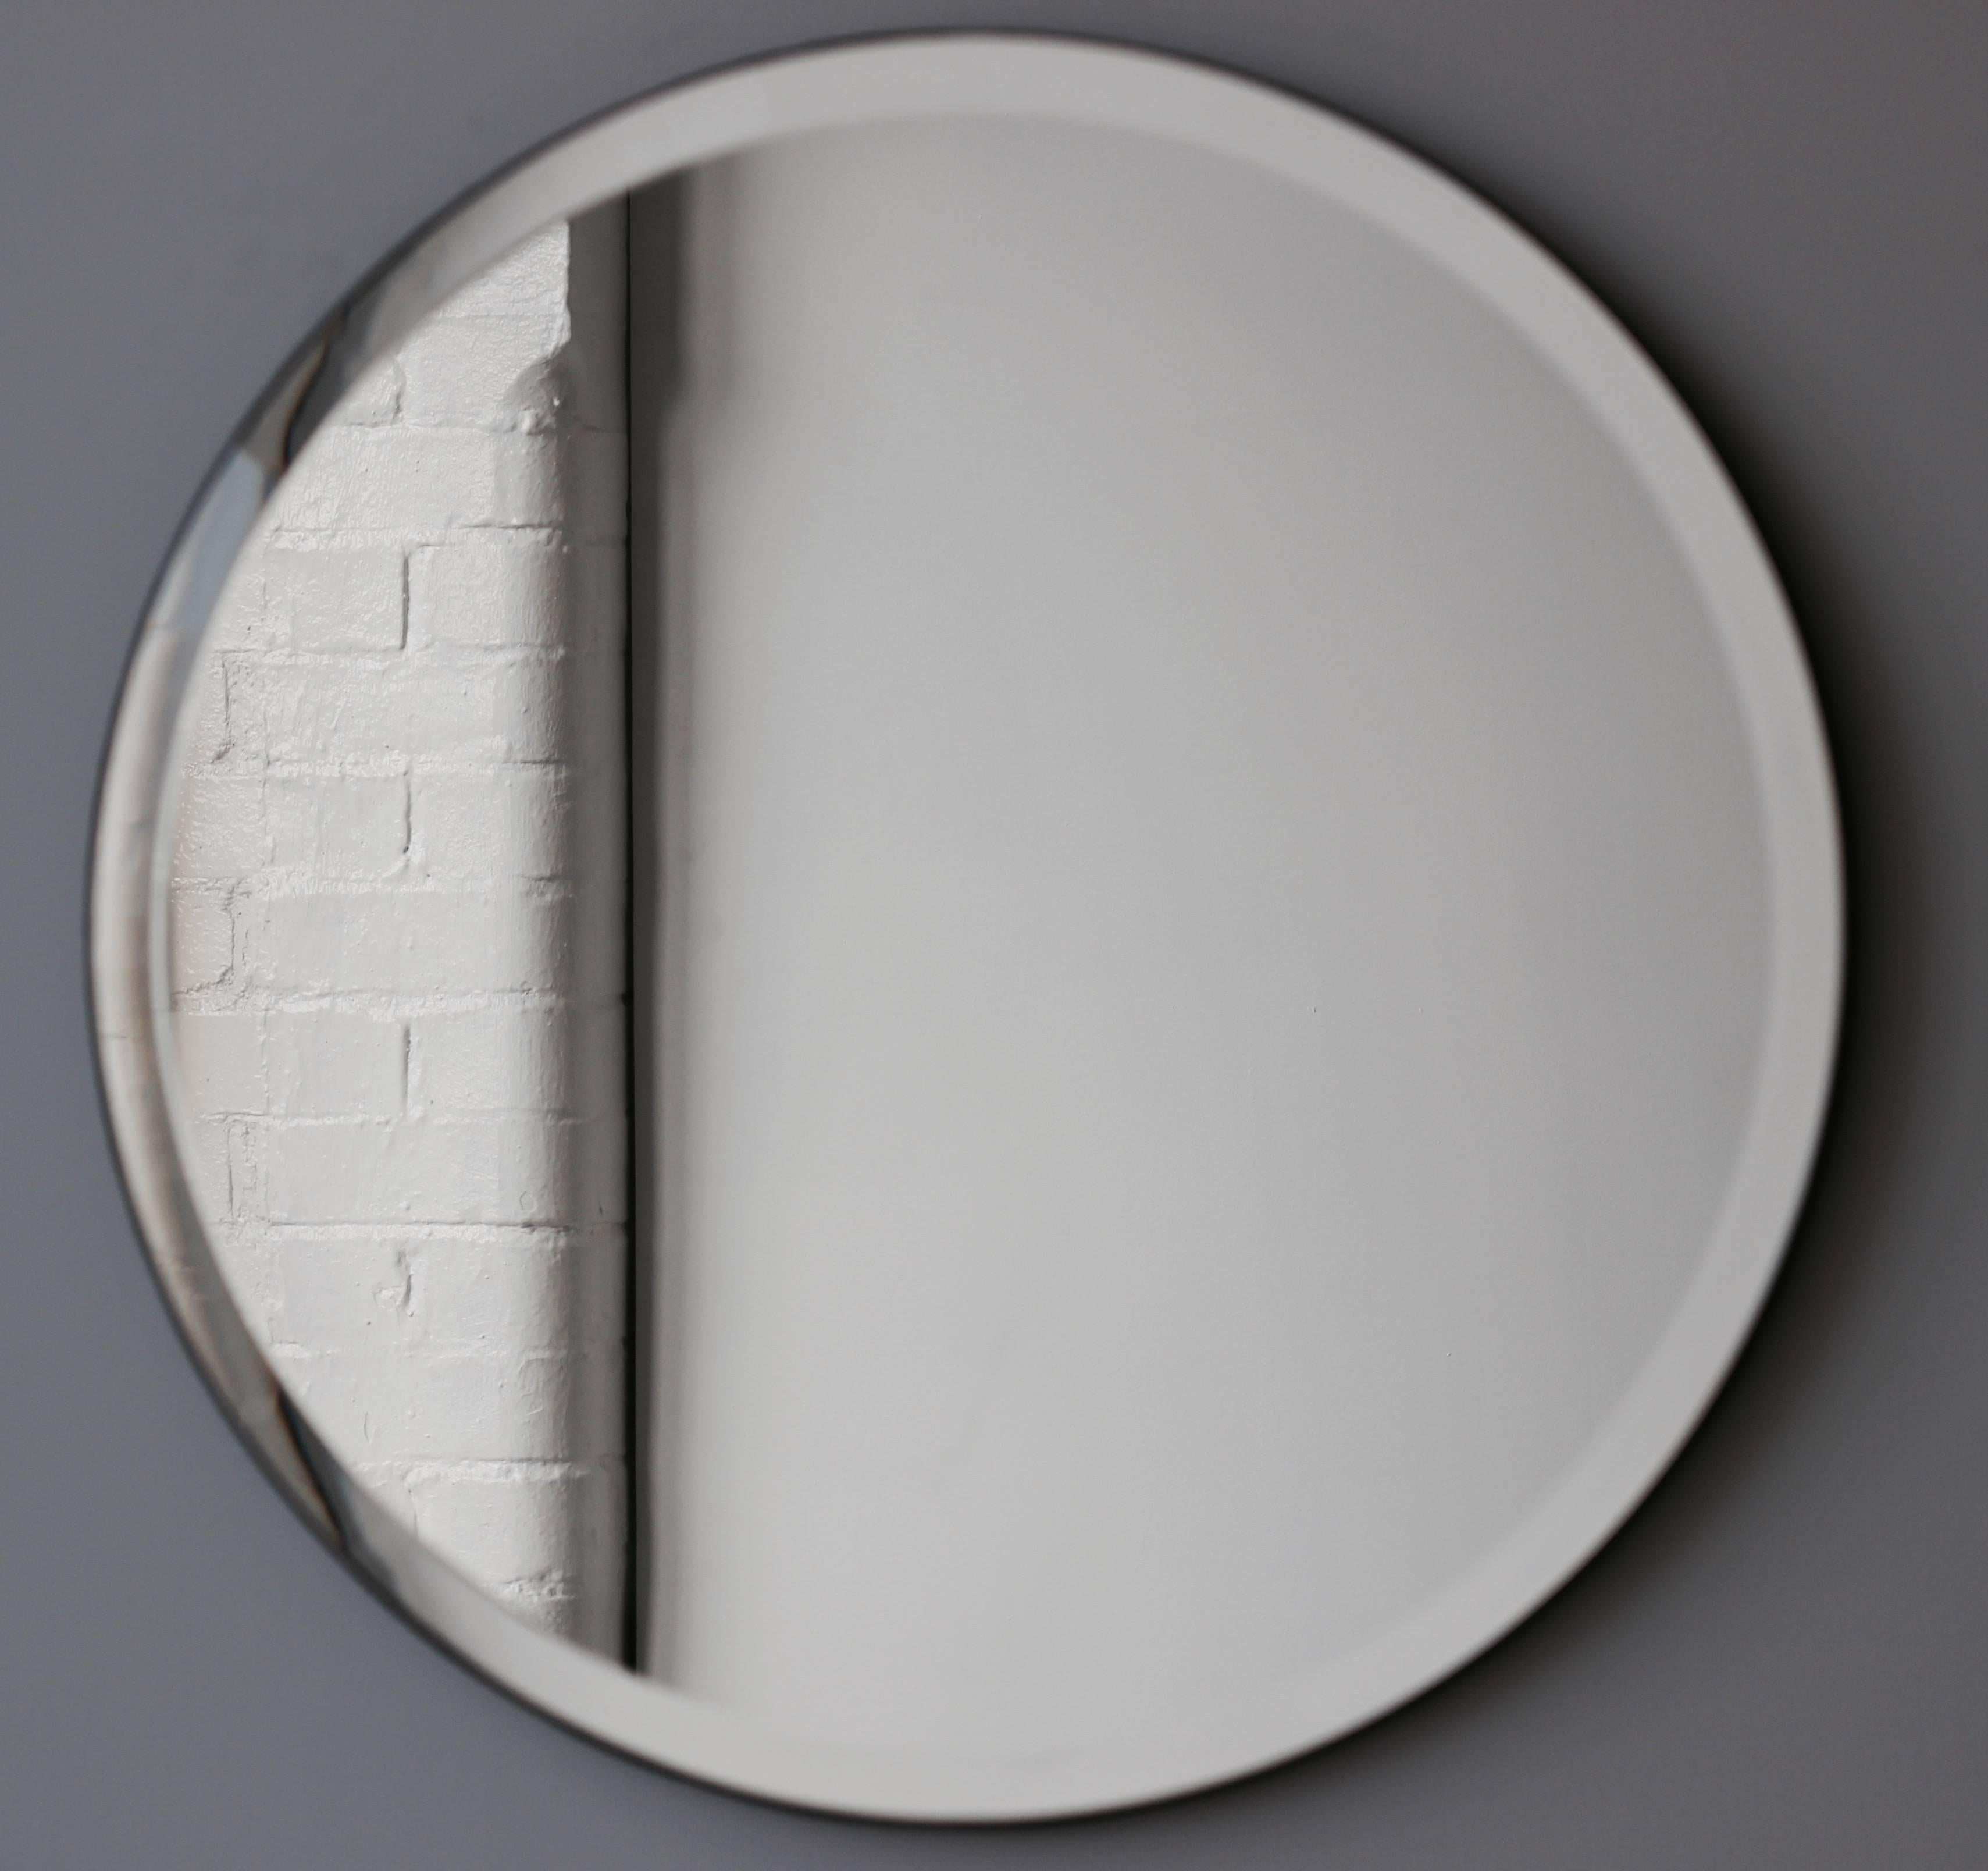 Art Deco style Orbis™ frameless mirror with an elegant bevel, velvet backing and optional brass clips. Designed and handcrafted in London, UK.

Our mirrors are designed with an integrated French cleat (split batten) system that ensures the mirror is